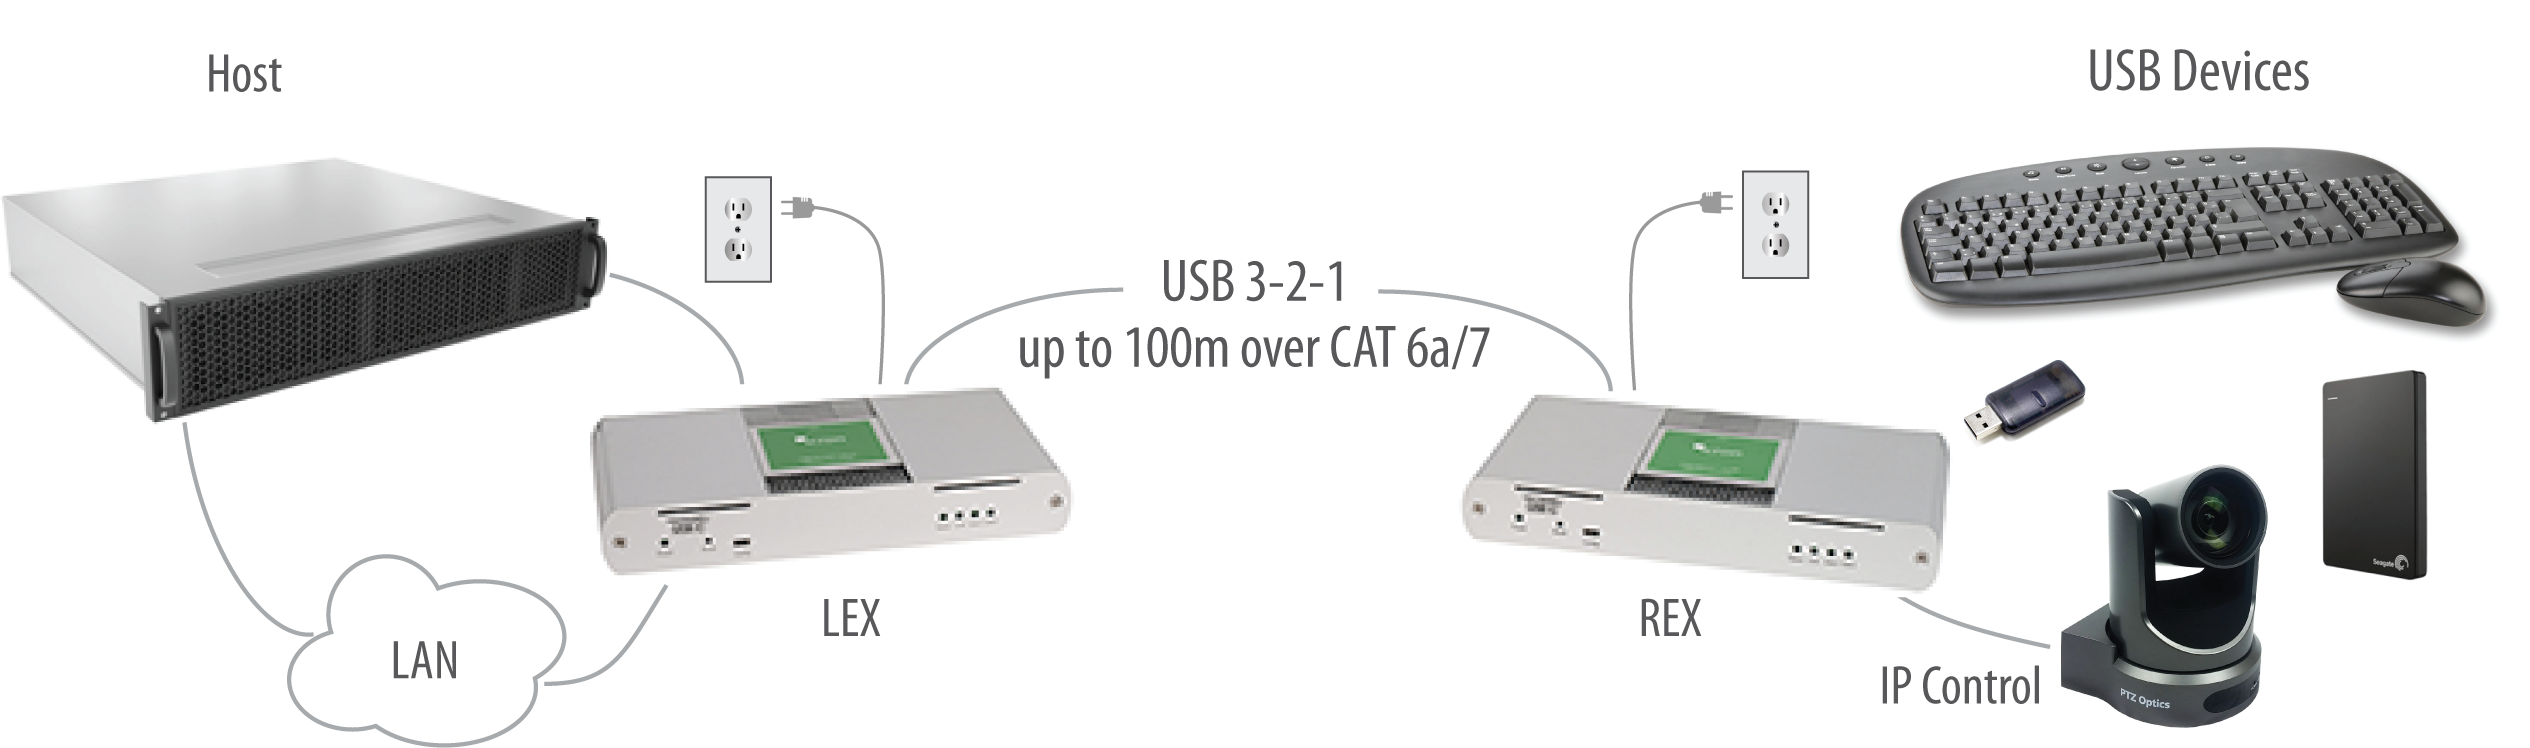 Icron USB 3-2-1 Raven 3104 100m CAT 6a/7 Point-to-Point Extender System Application Diagram